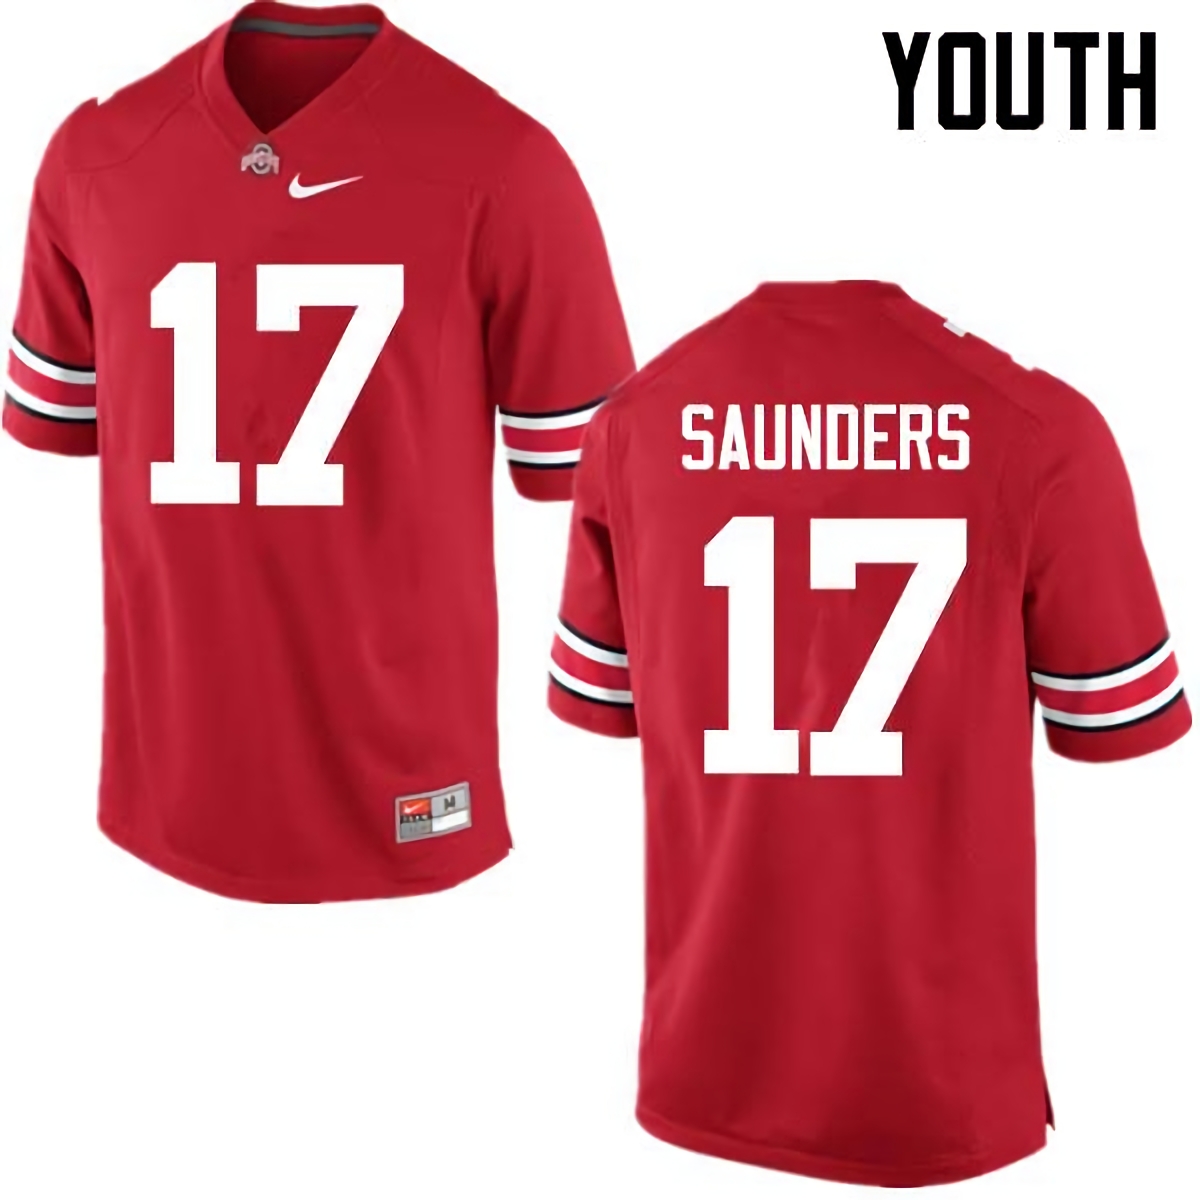 C.J. Saunders Ohio State Buckeyes Youth NCAA #17 Nike Red College Stitched Football Jersey BFP0756QJ